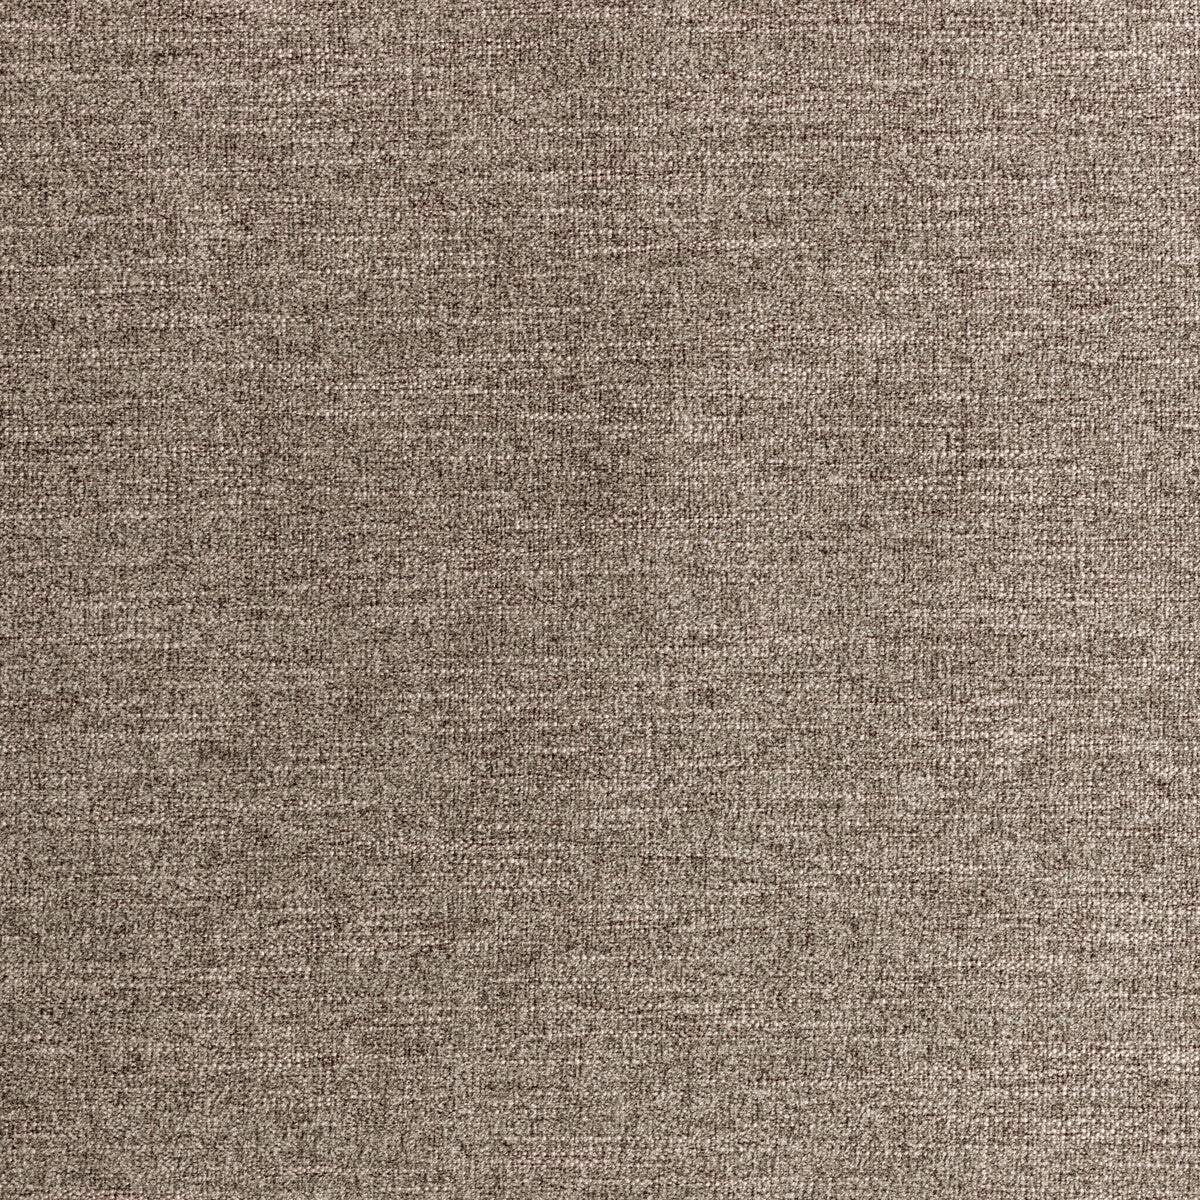 Kravet Smart fabric in 36292-6 color - pattern 36292.6.0 - by Kravet Smart in the Performance Crypton Home collection